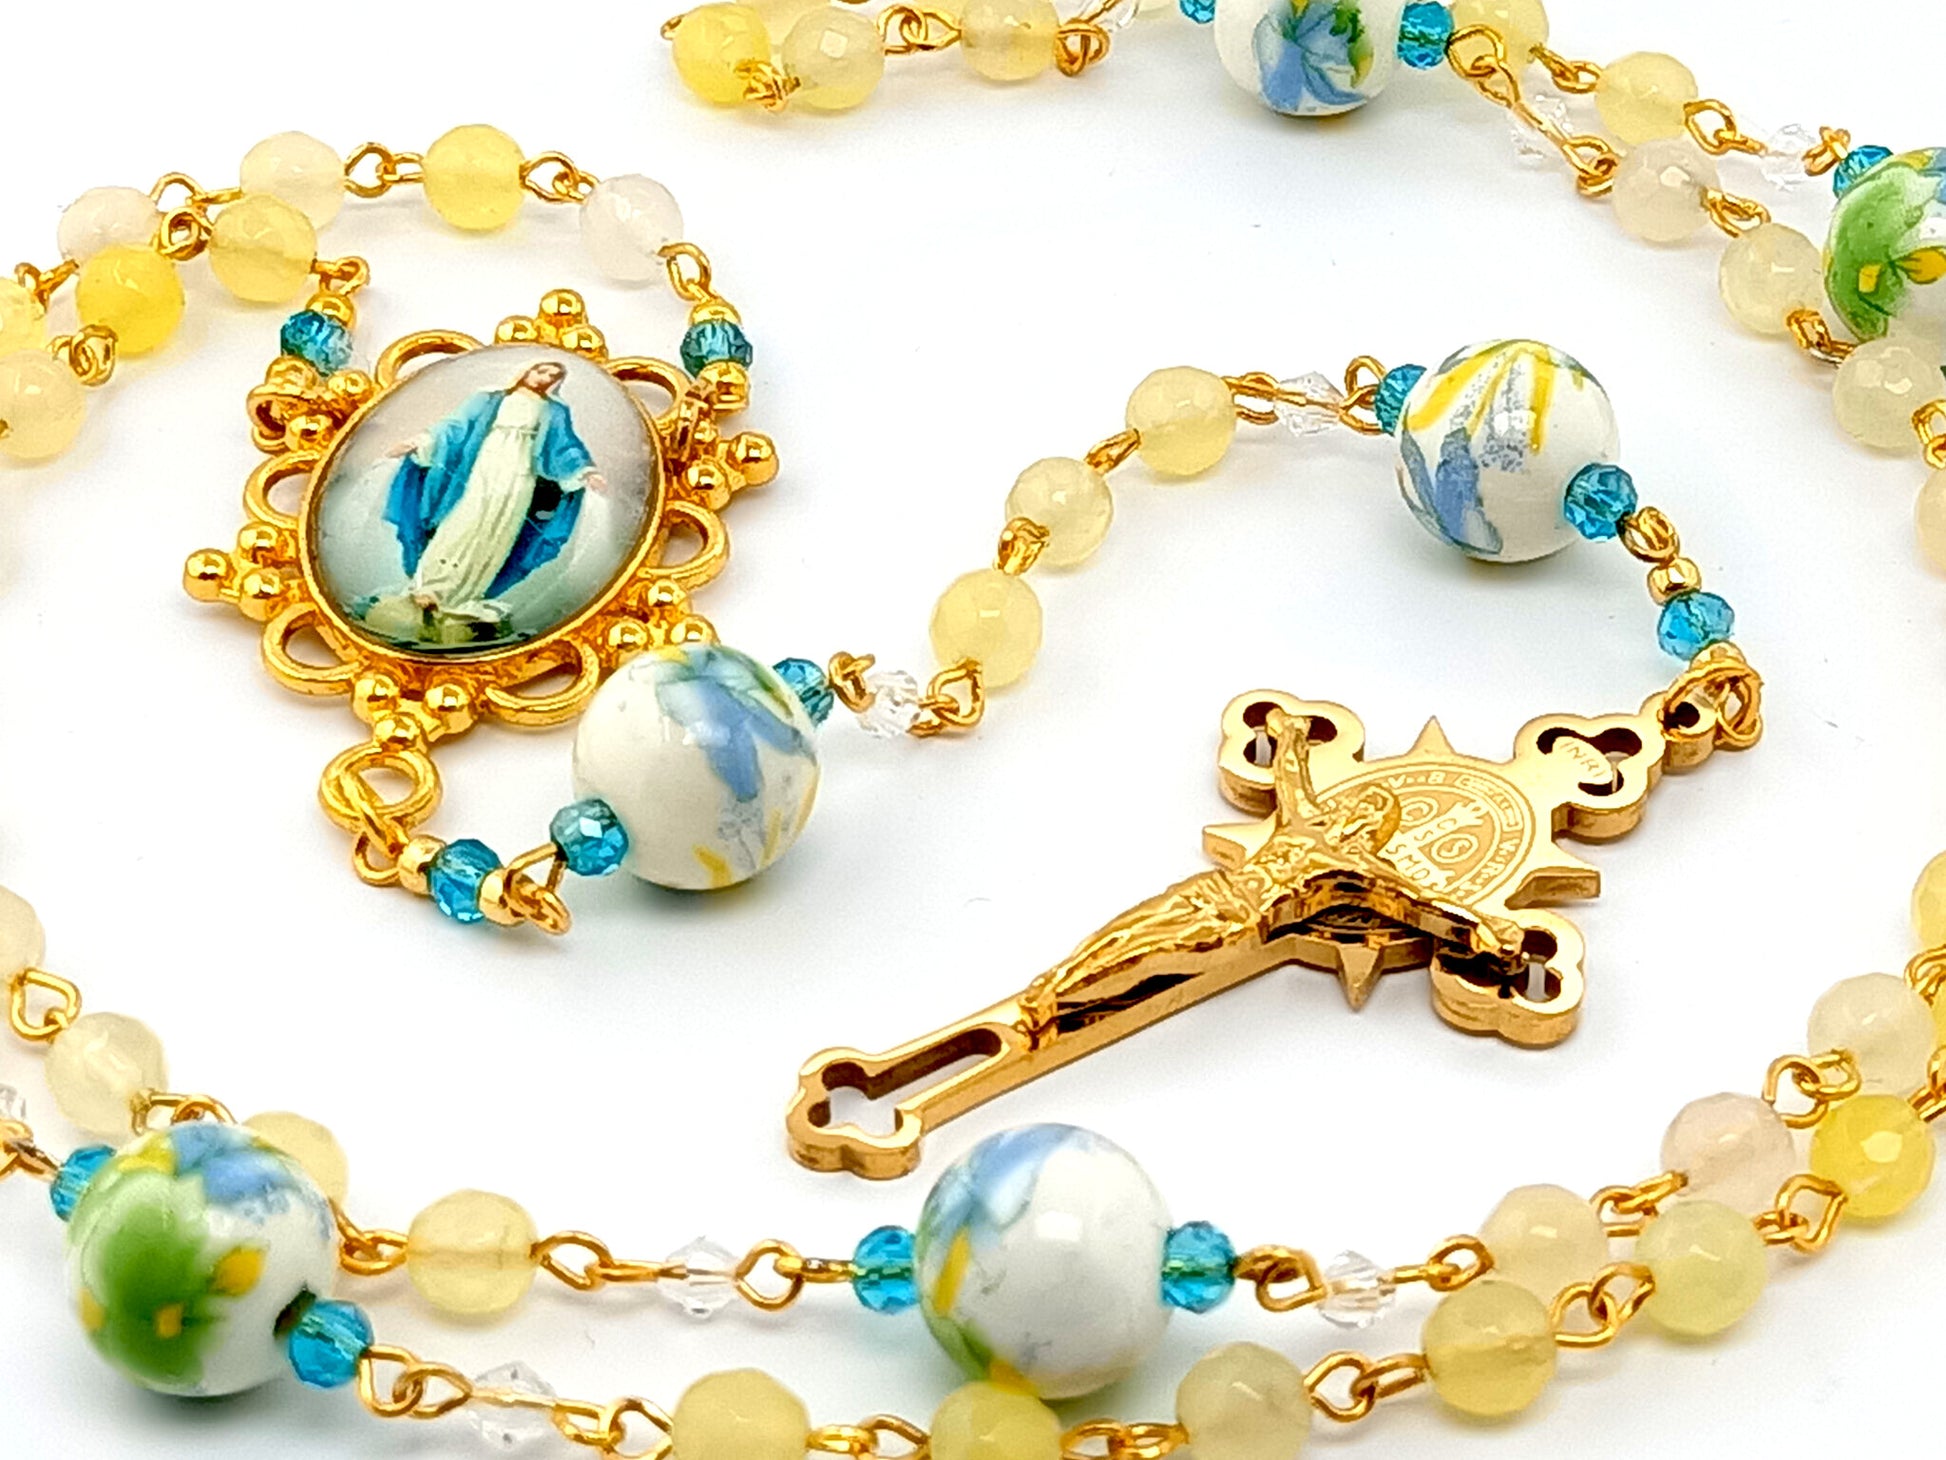 Our Lady of Grace unique rosary beads with agate gemstone and floral porcelain beads and gold plated etched Saint Benedict crucifix.